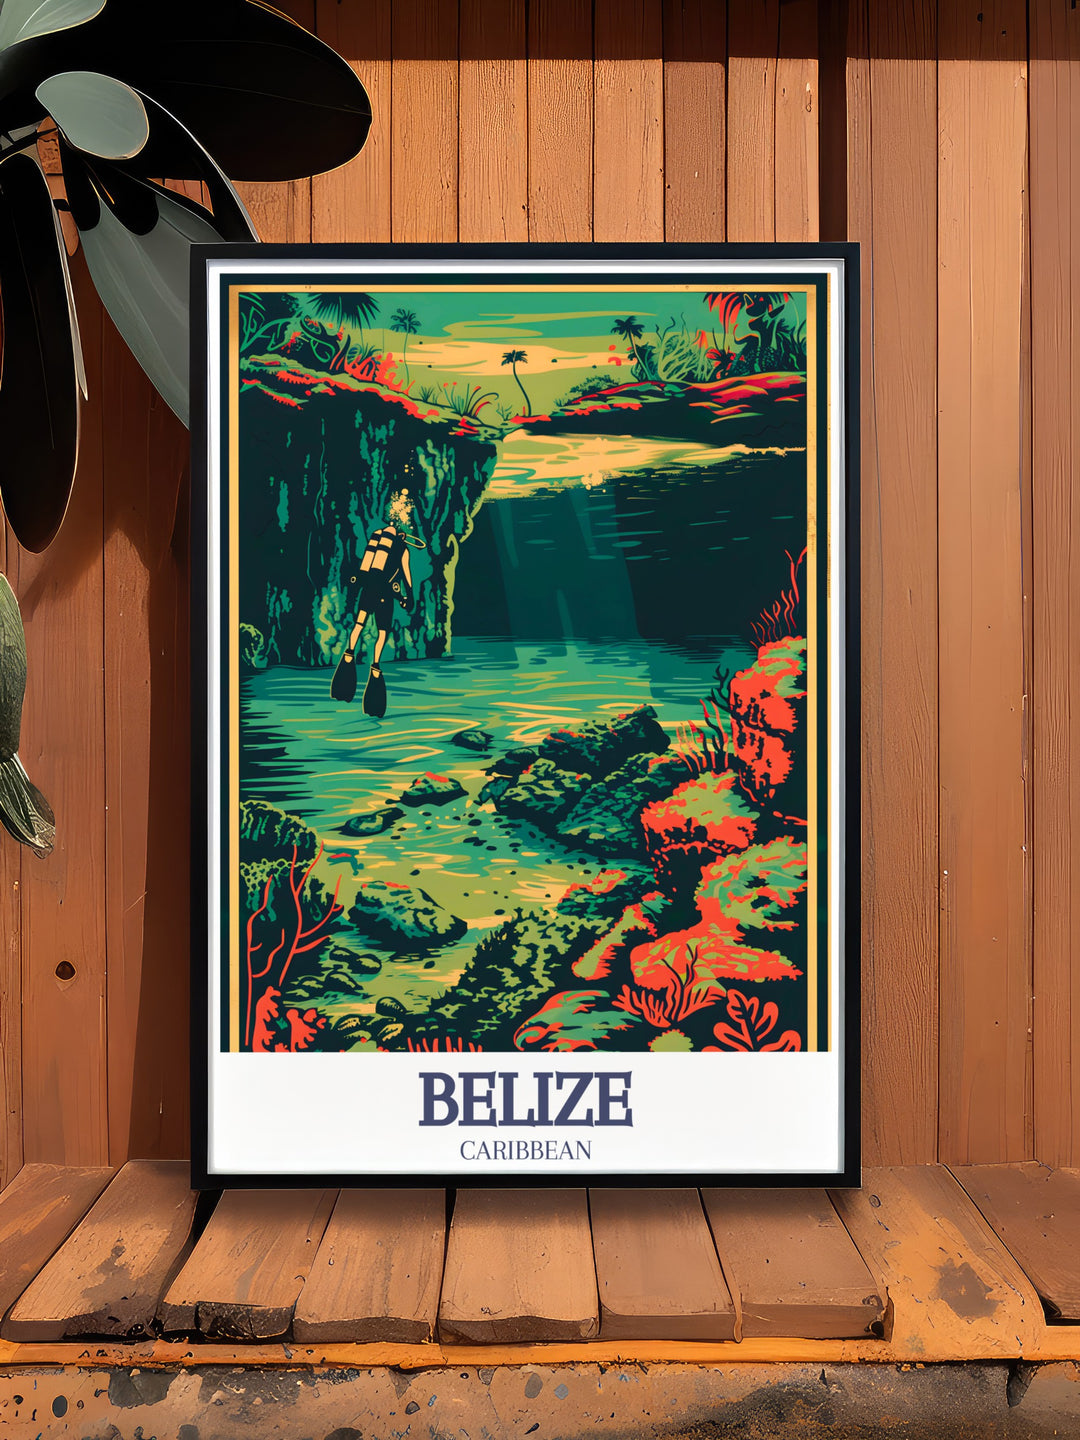 Blue Hole Belize Barrier Reef artwork showcasing the natural beauty and cultural charm of the Caribbean ideal for those who appreciate high quality art and the vibrant energy of tropical destinations